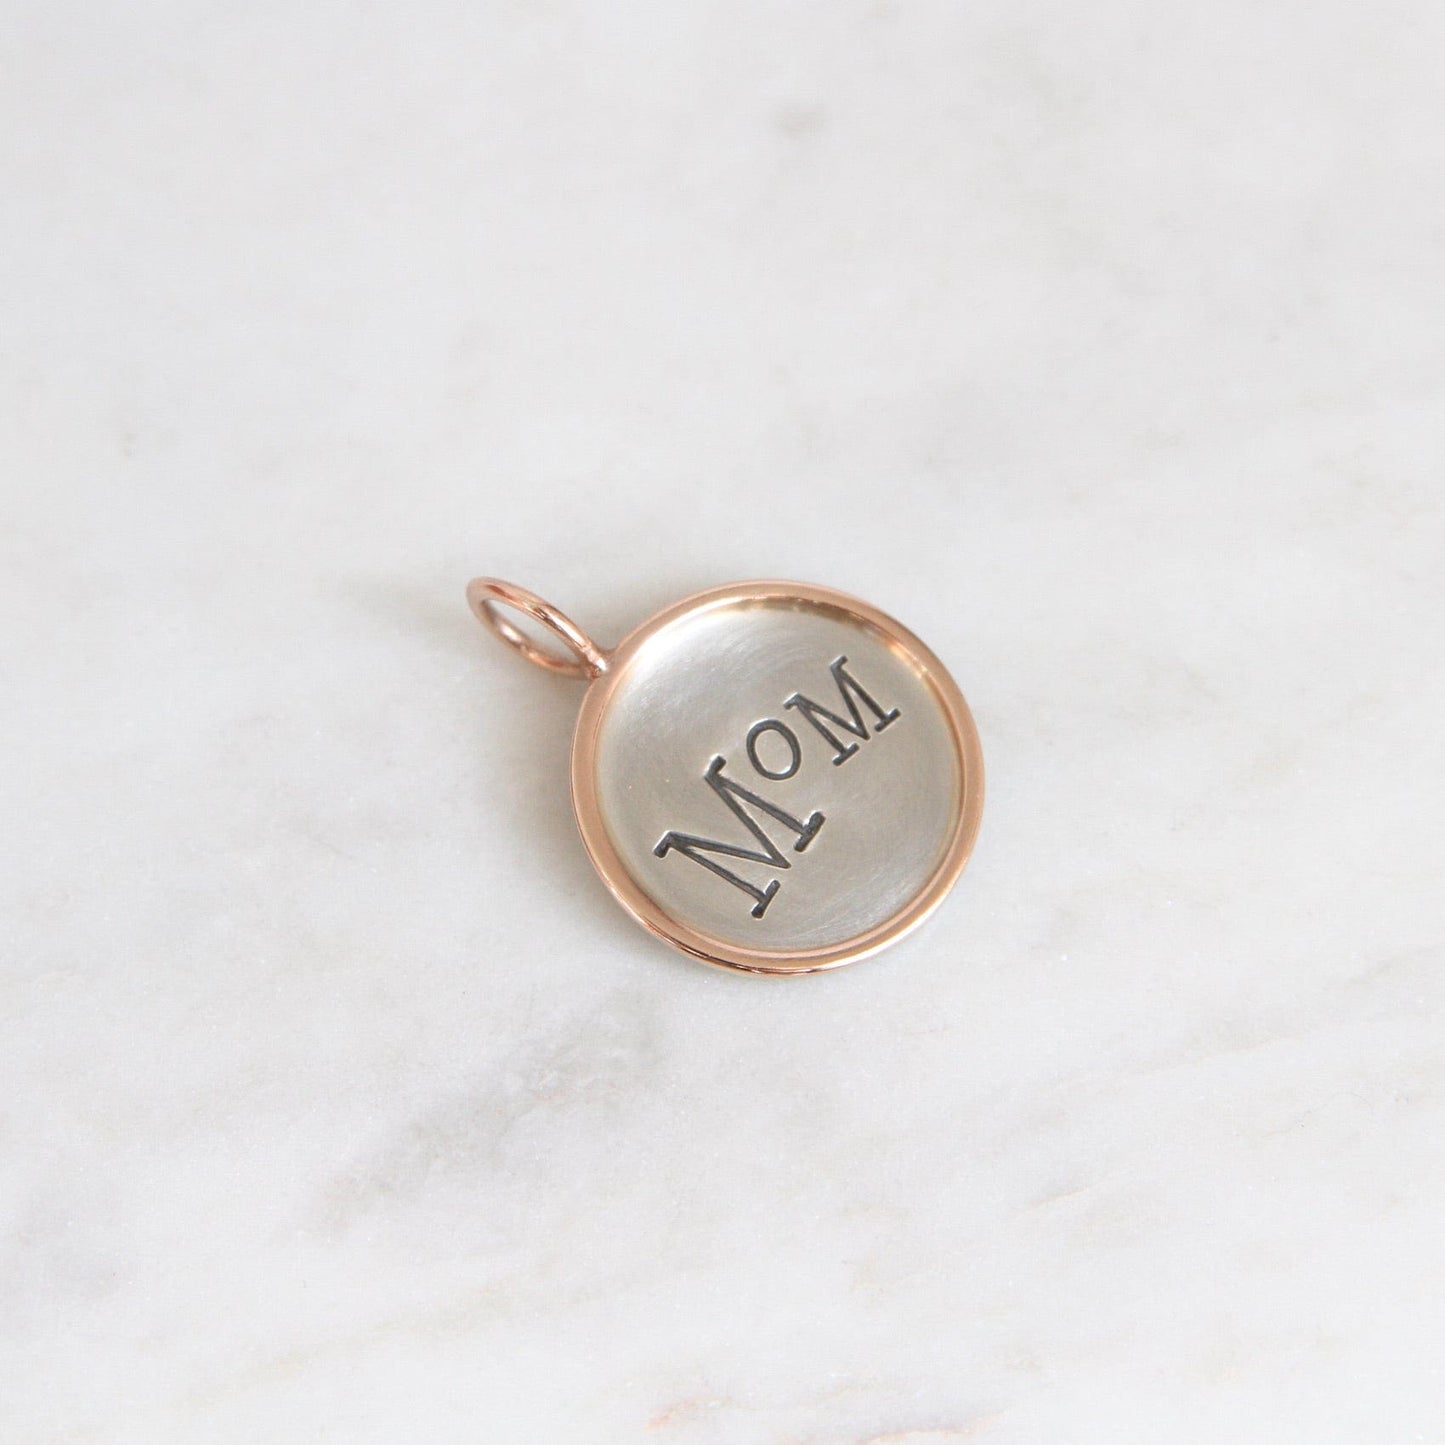 CHM Silver "Mom" Round Charm with Rose Gold Frame